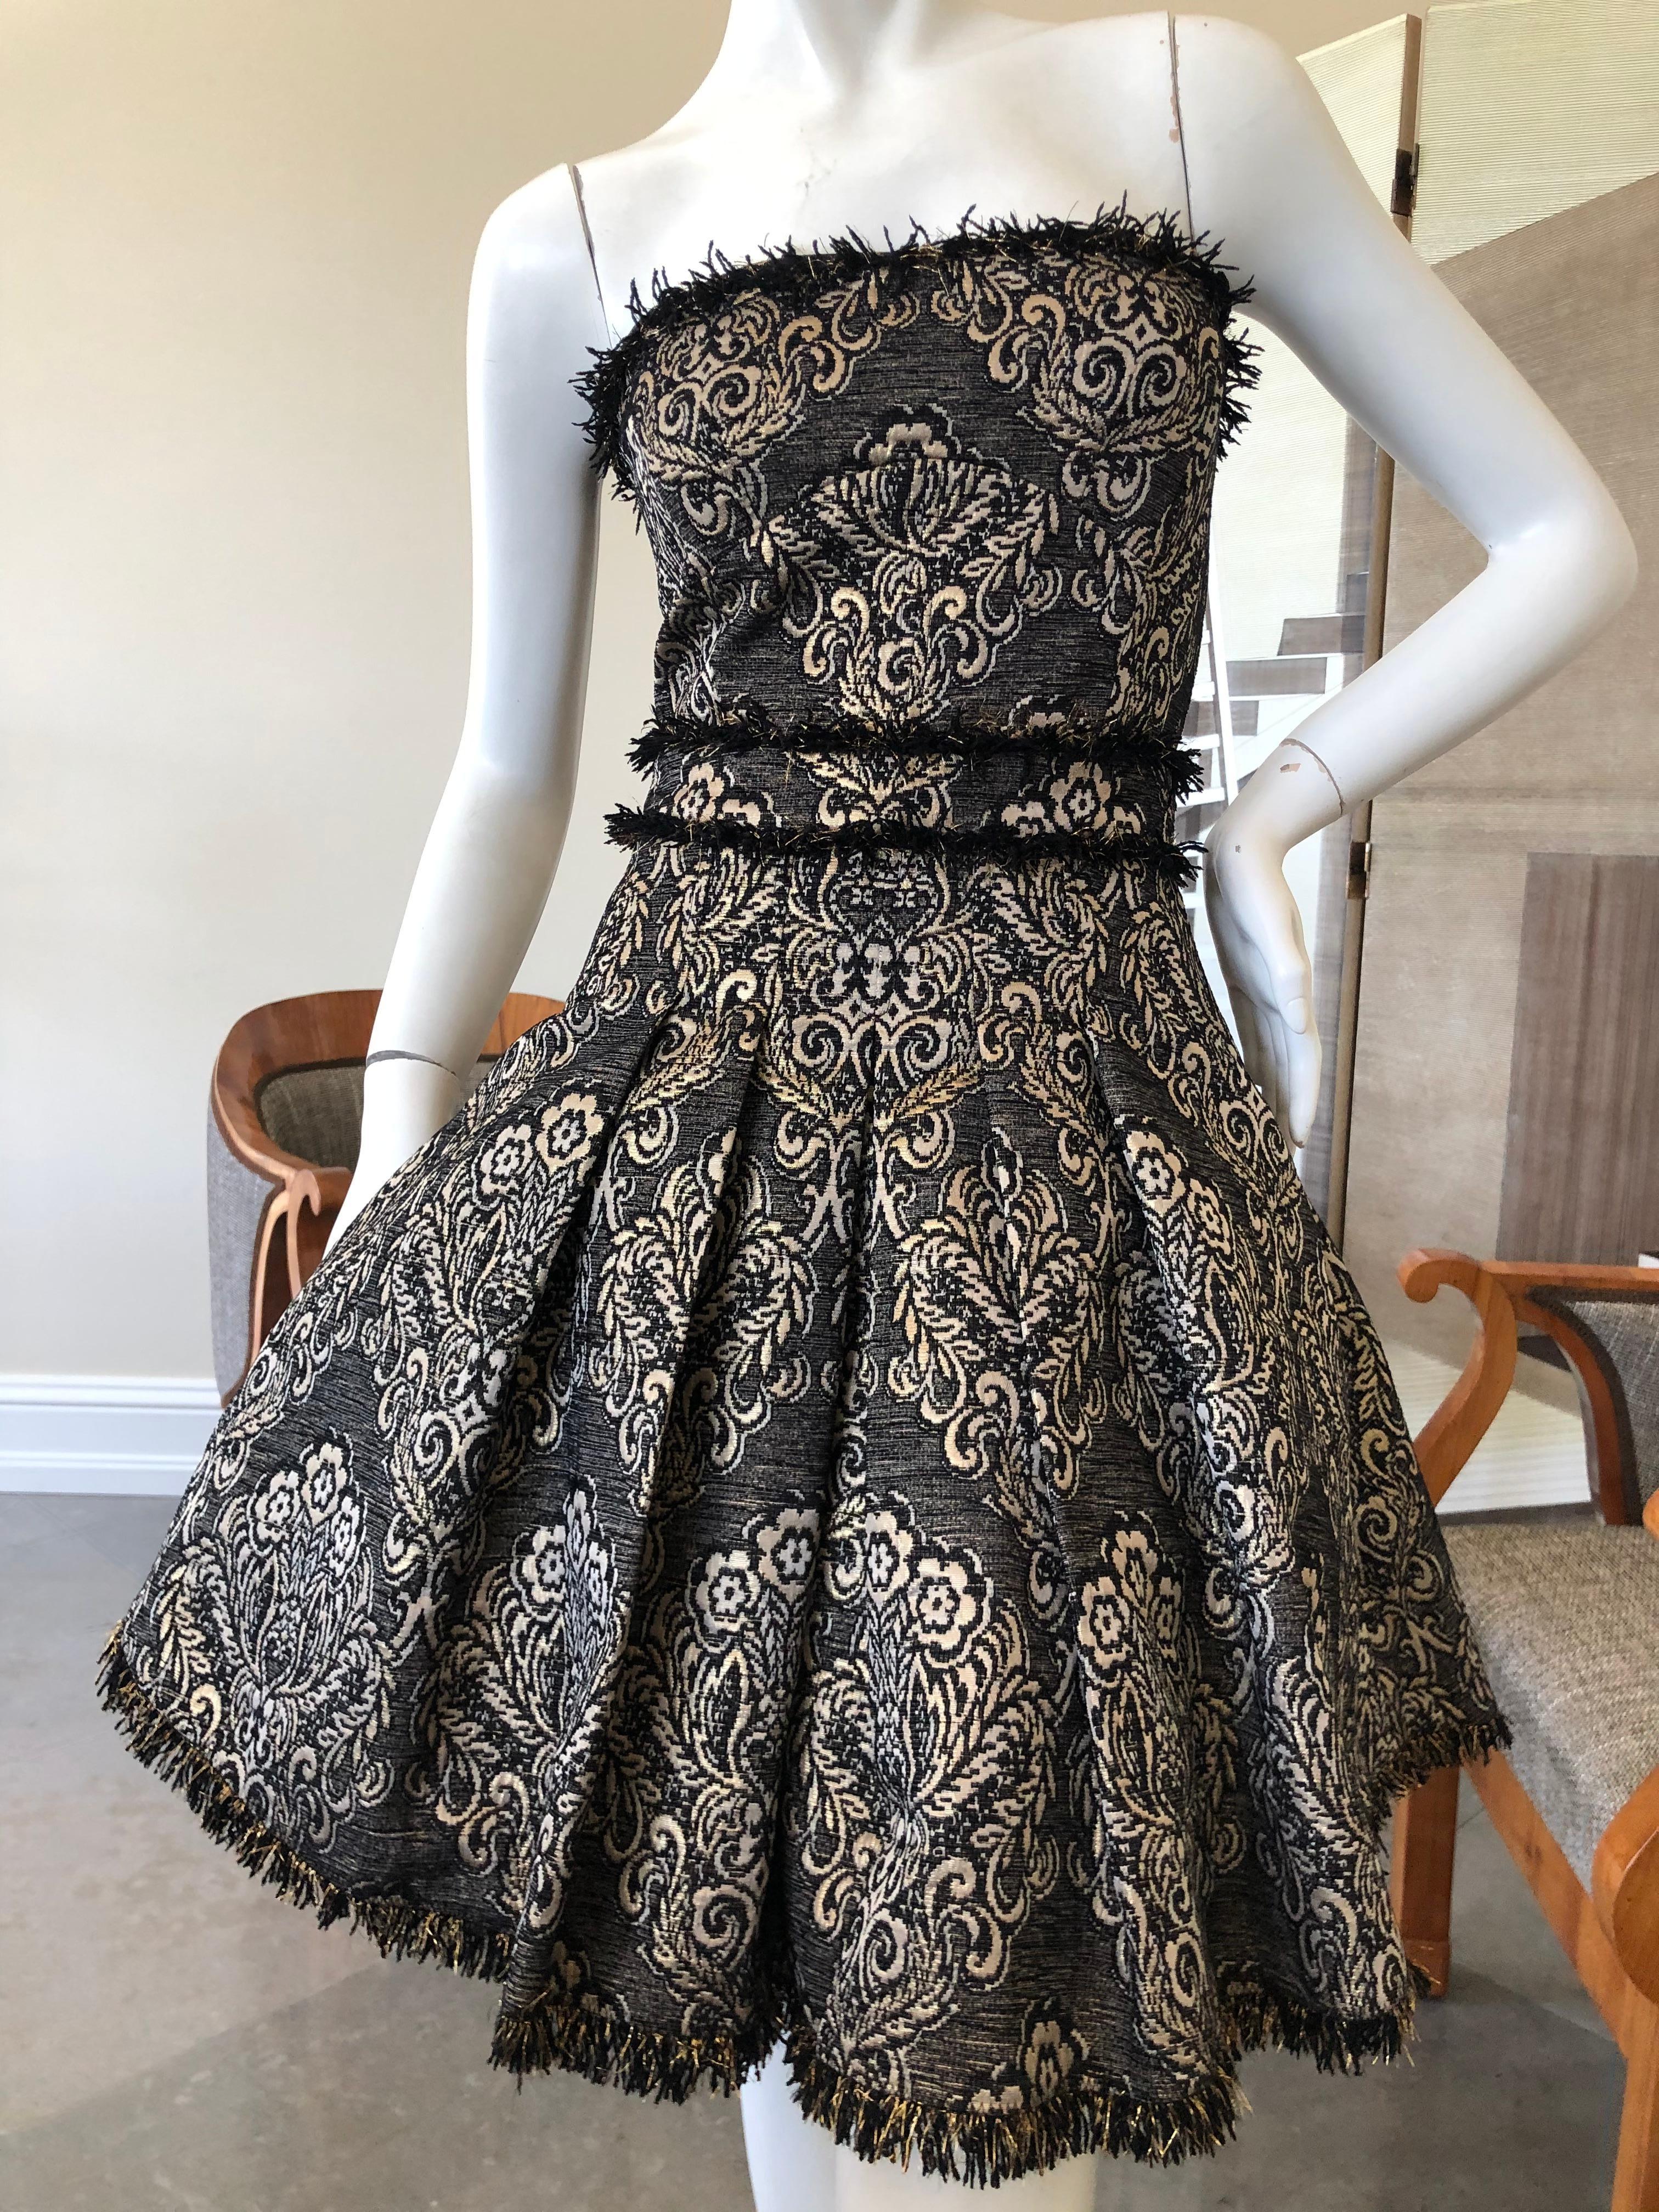 Dolce & Gabbana for D&G Strapless Mini Ball Gown with Full Corset & Petticoats.
This is so sweet, like a mini ball gown in a baroque pattern that has a lot of gold and silver.
 Zips up the back
This is so wonderful, so sexy. the photos don't do it